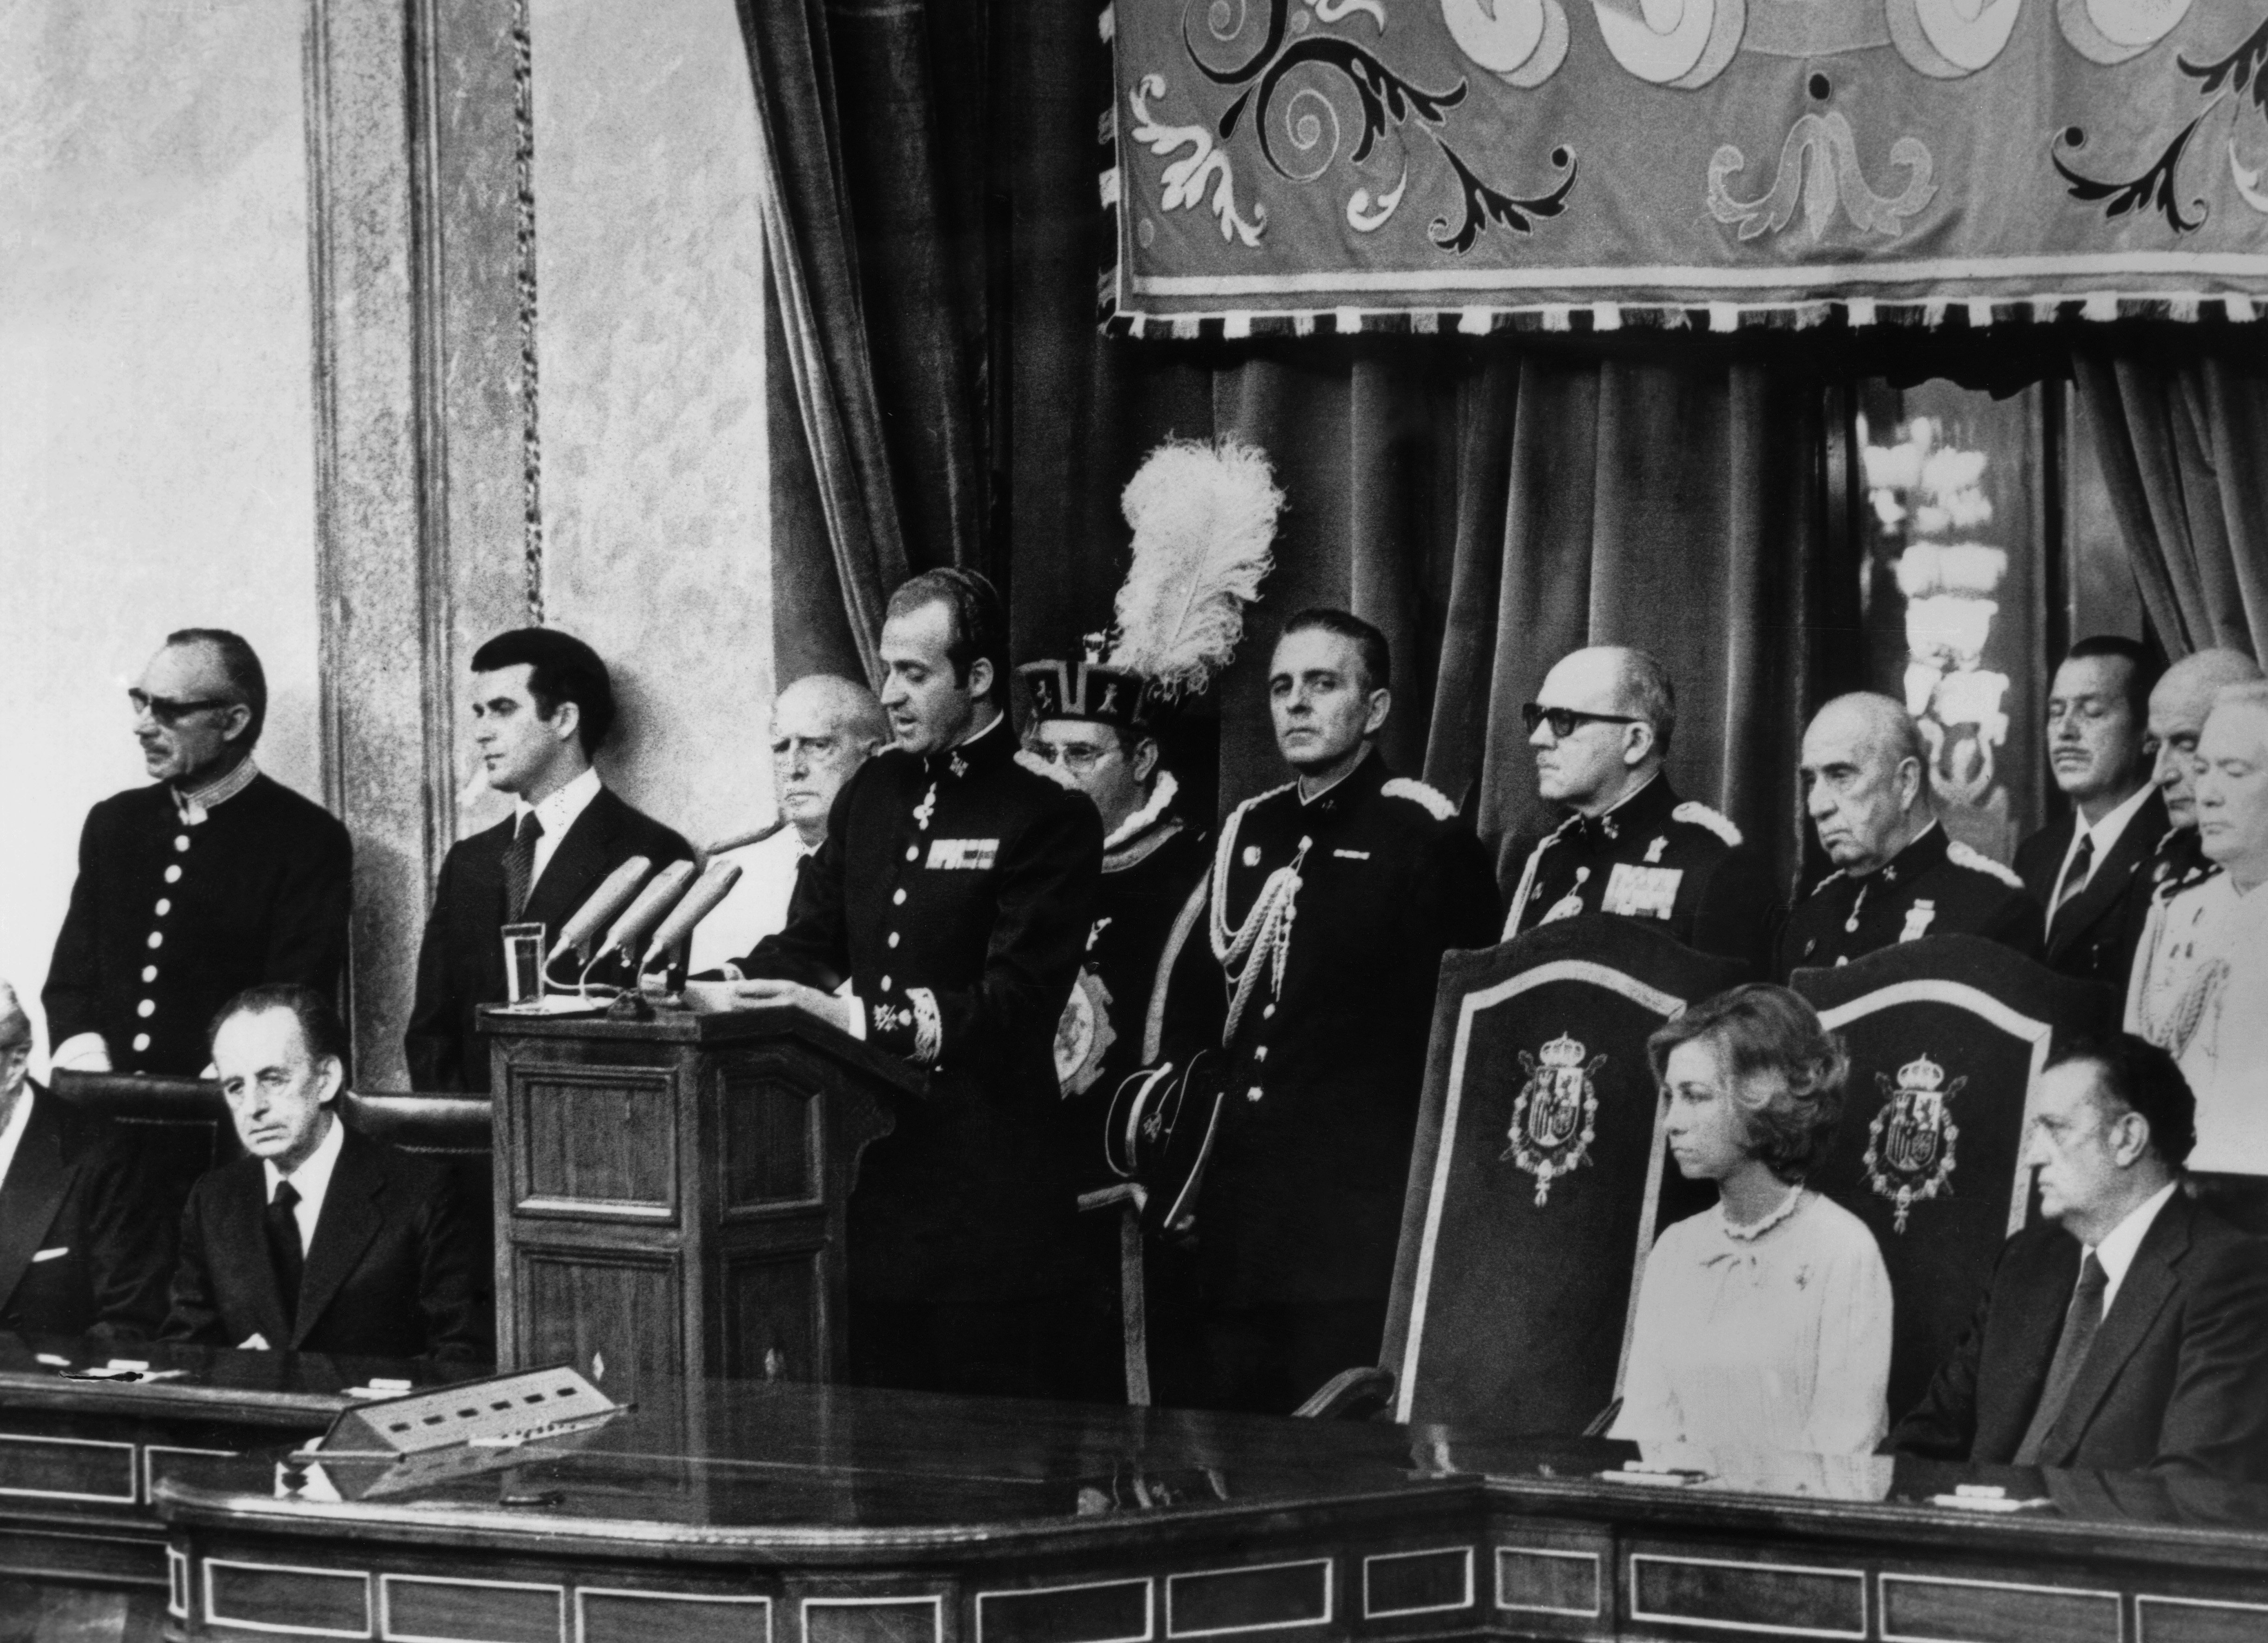 King Juan Carlos I of Spain inaugurating the first democratically-elected Spanish Cortes, in the presence of 800 deputies and senators and his wife Queen Sofia on July 27, 1977. / Source: Getty Images